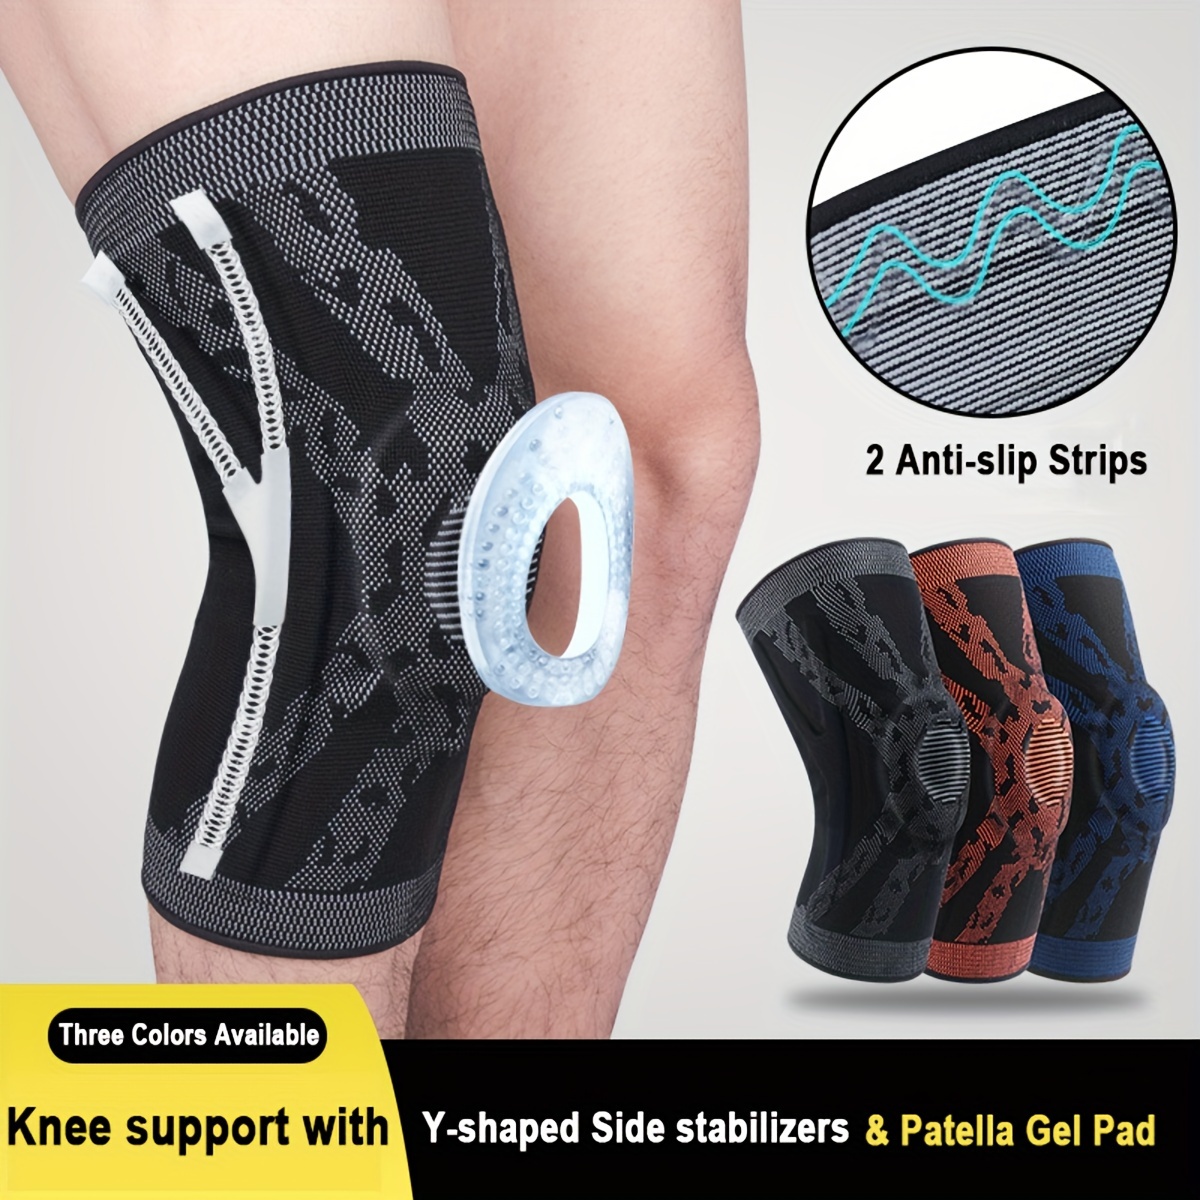 Does a knee compression sleeve really work?